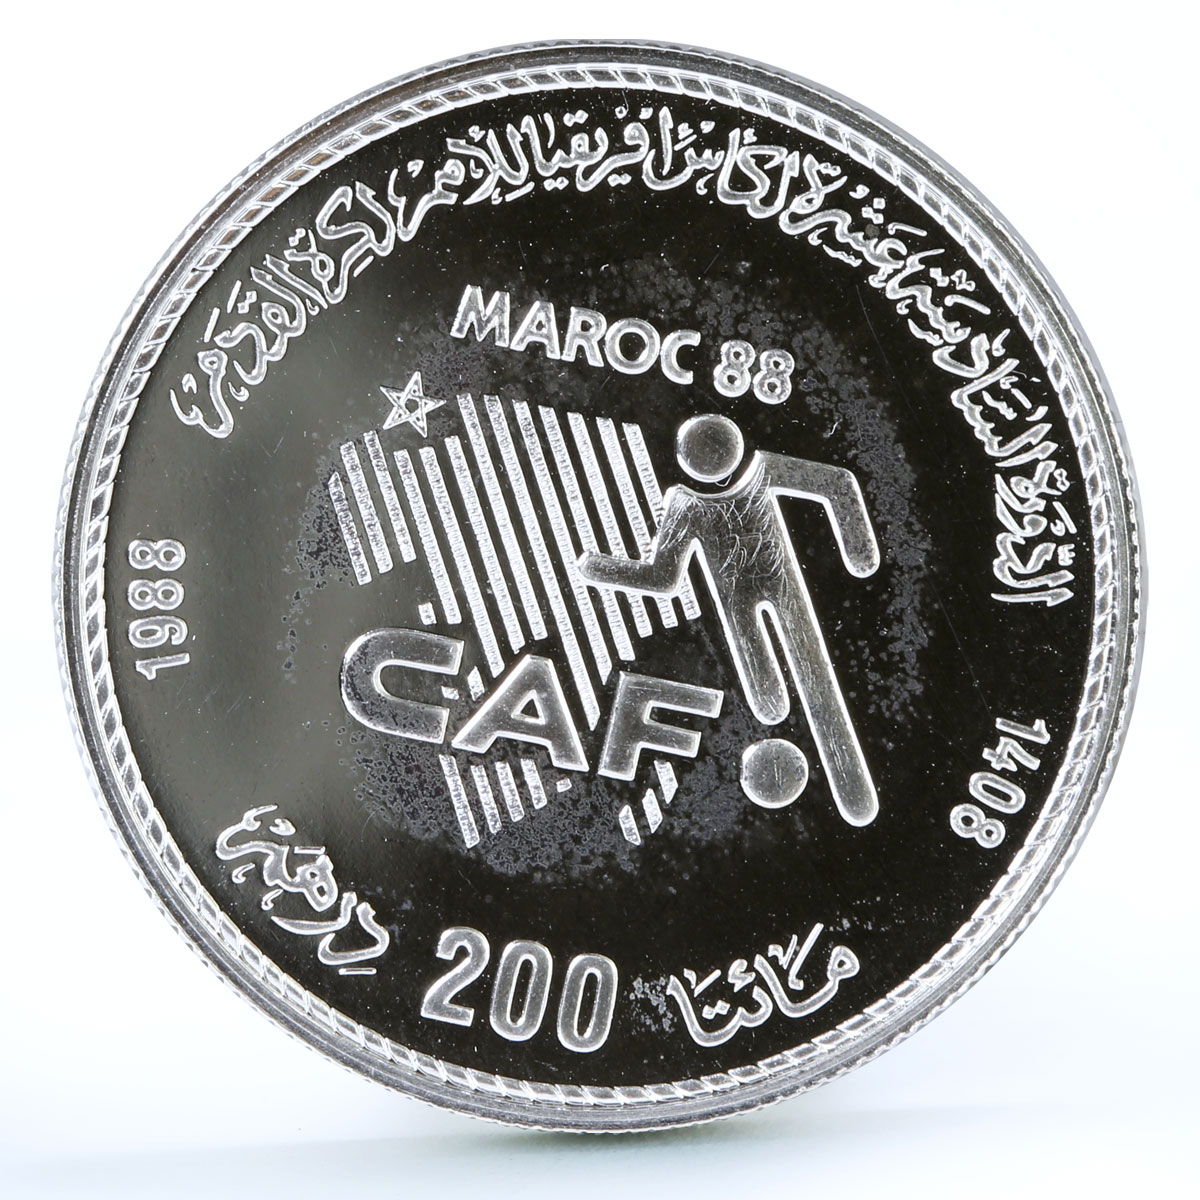 Morocco 200 dirhams African Cup of Nations Football Sports silver coin 1988